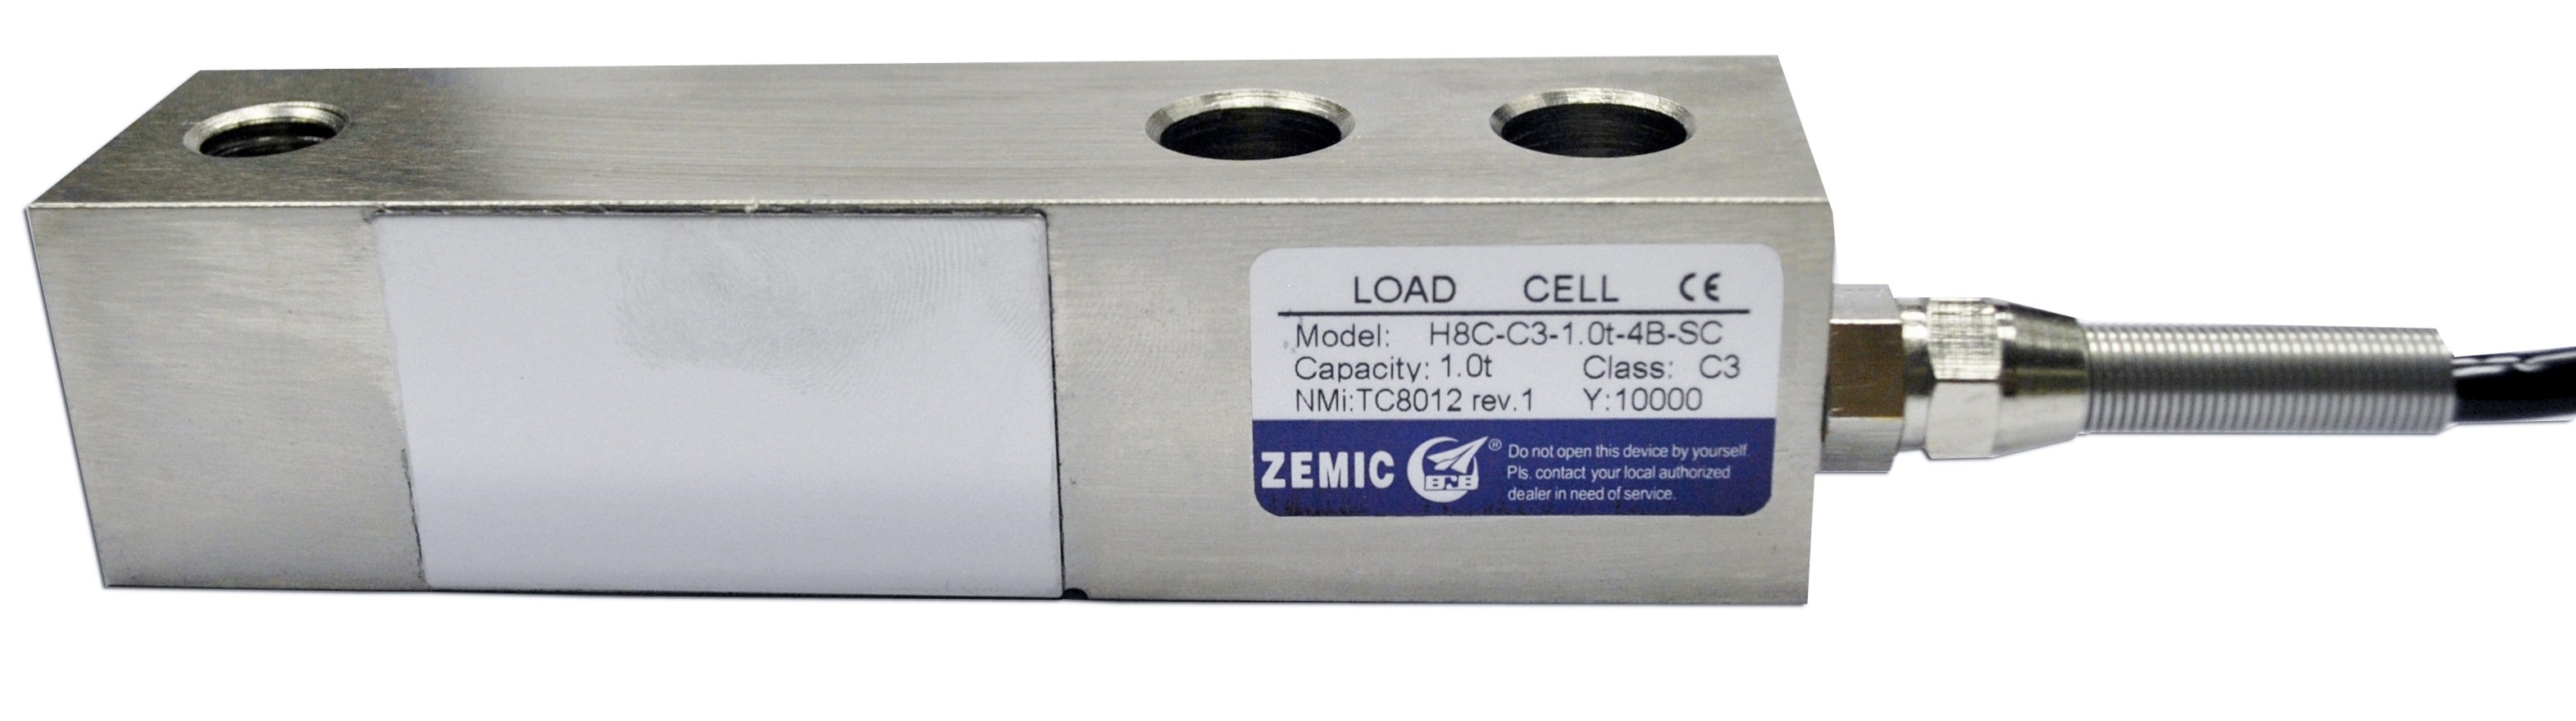 Zemic H8C Shearbeam Used For Hospital Beds